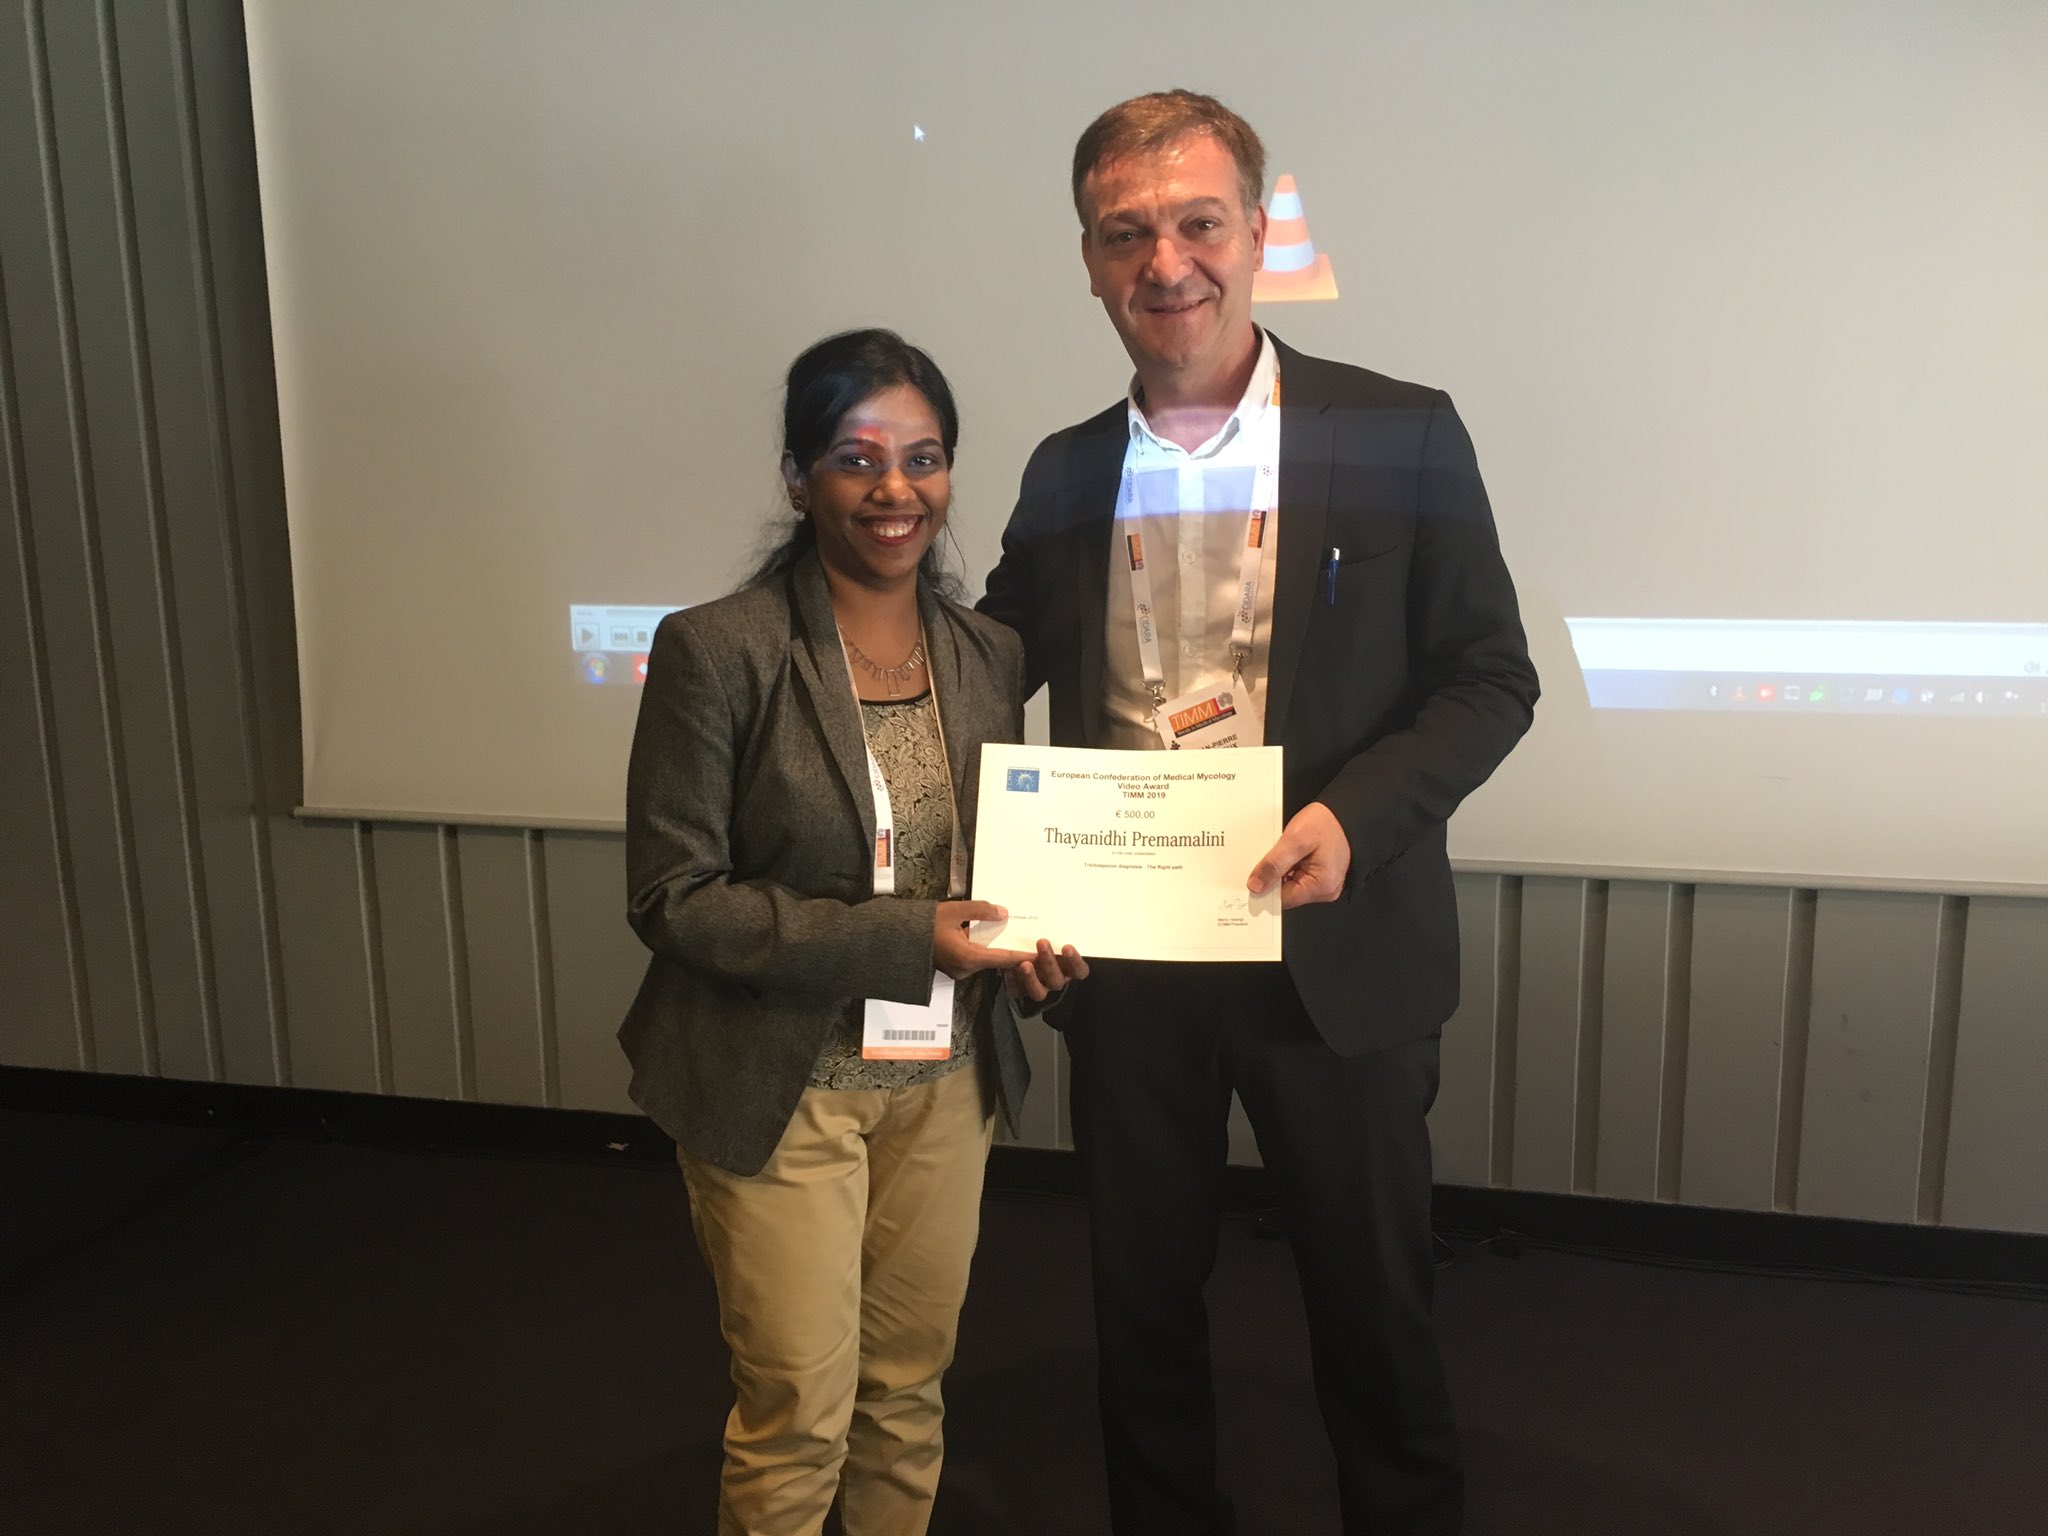 andrageren opnåelige lufthavn ECMM on Twitter: "Video Abstract Session at #timm2019 thanks for fantastic  submissions and Congrats to our winner of the video abstract award Dr.  Premamalini. We will expand the video abstract session and